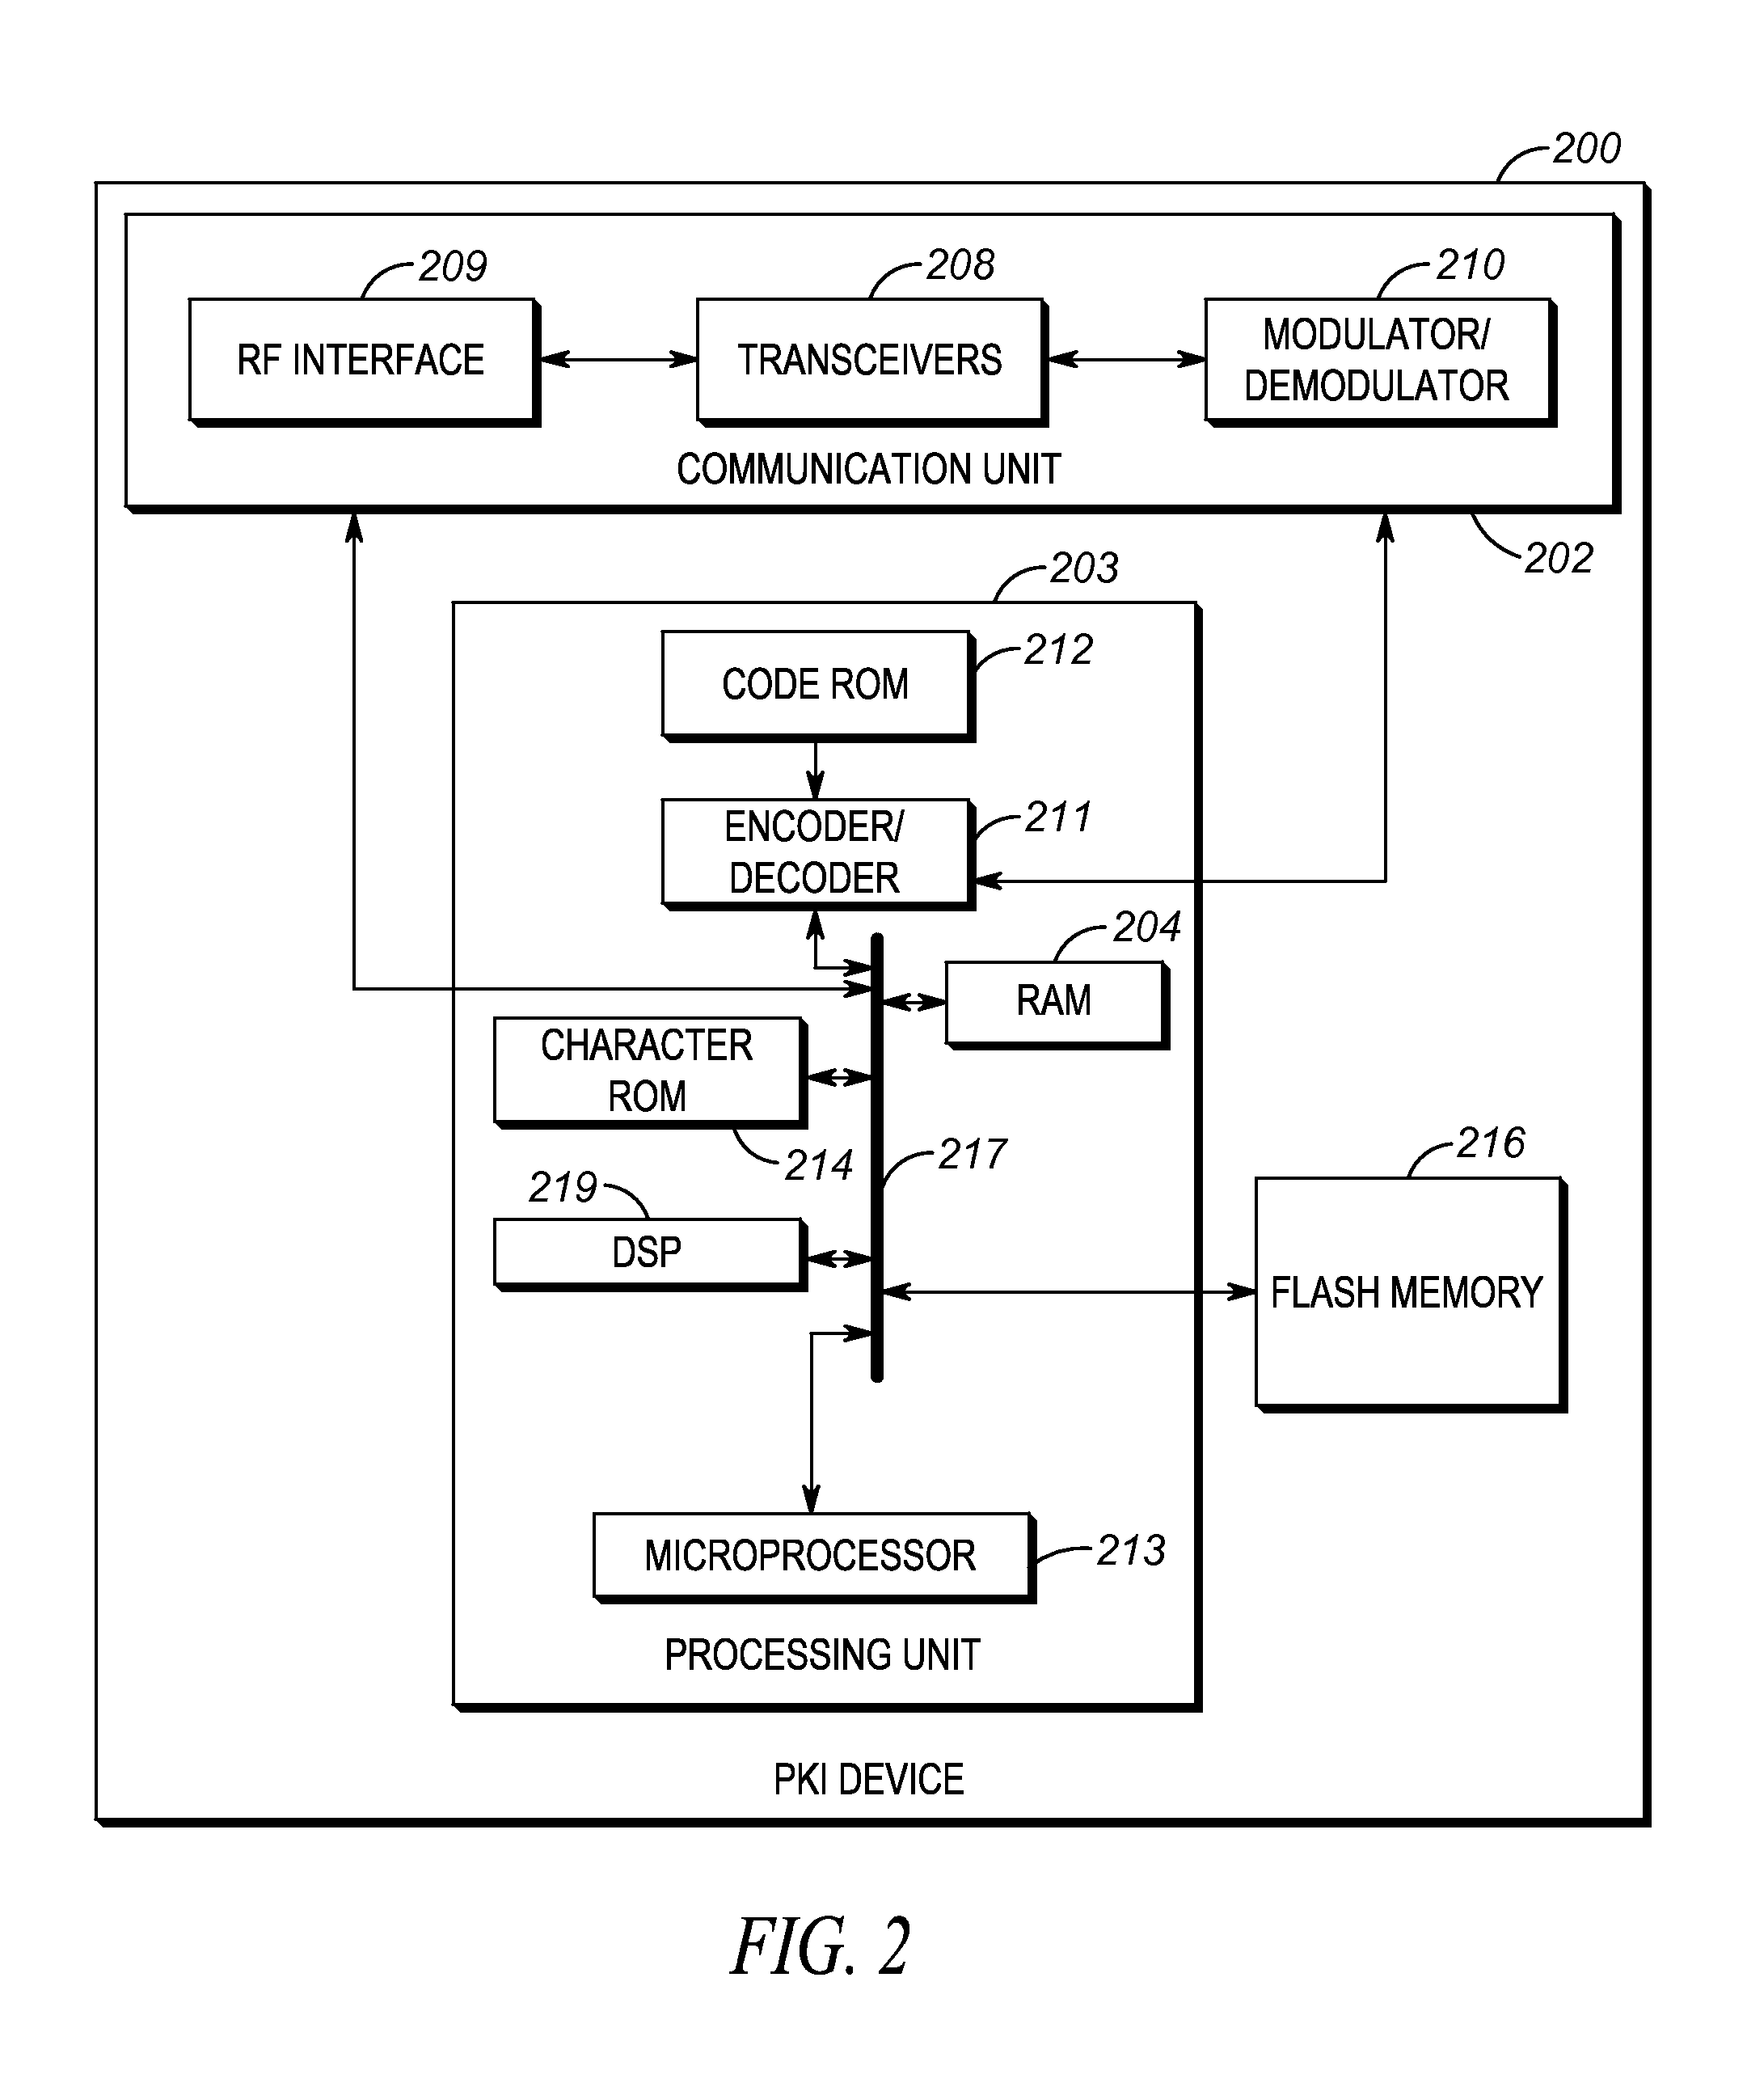 Method and apparatus for enabling secured certificate enrollment in a hybrid cloud public key infrastructure